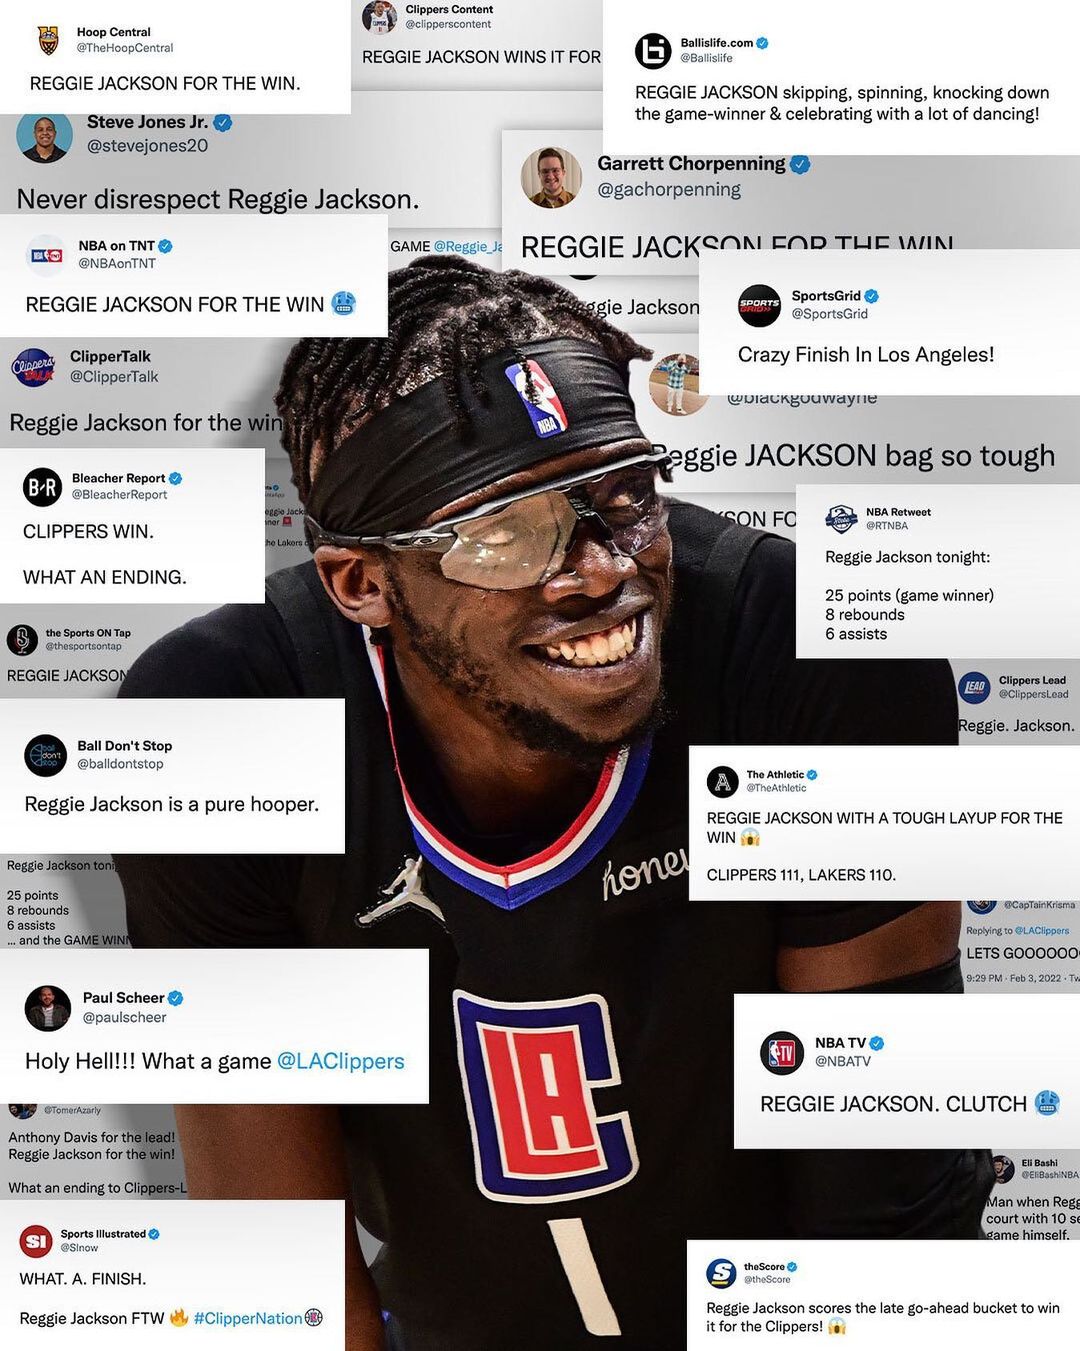 @reggie_jackson was the talk of the town....